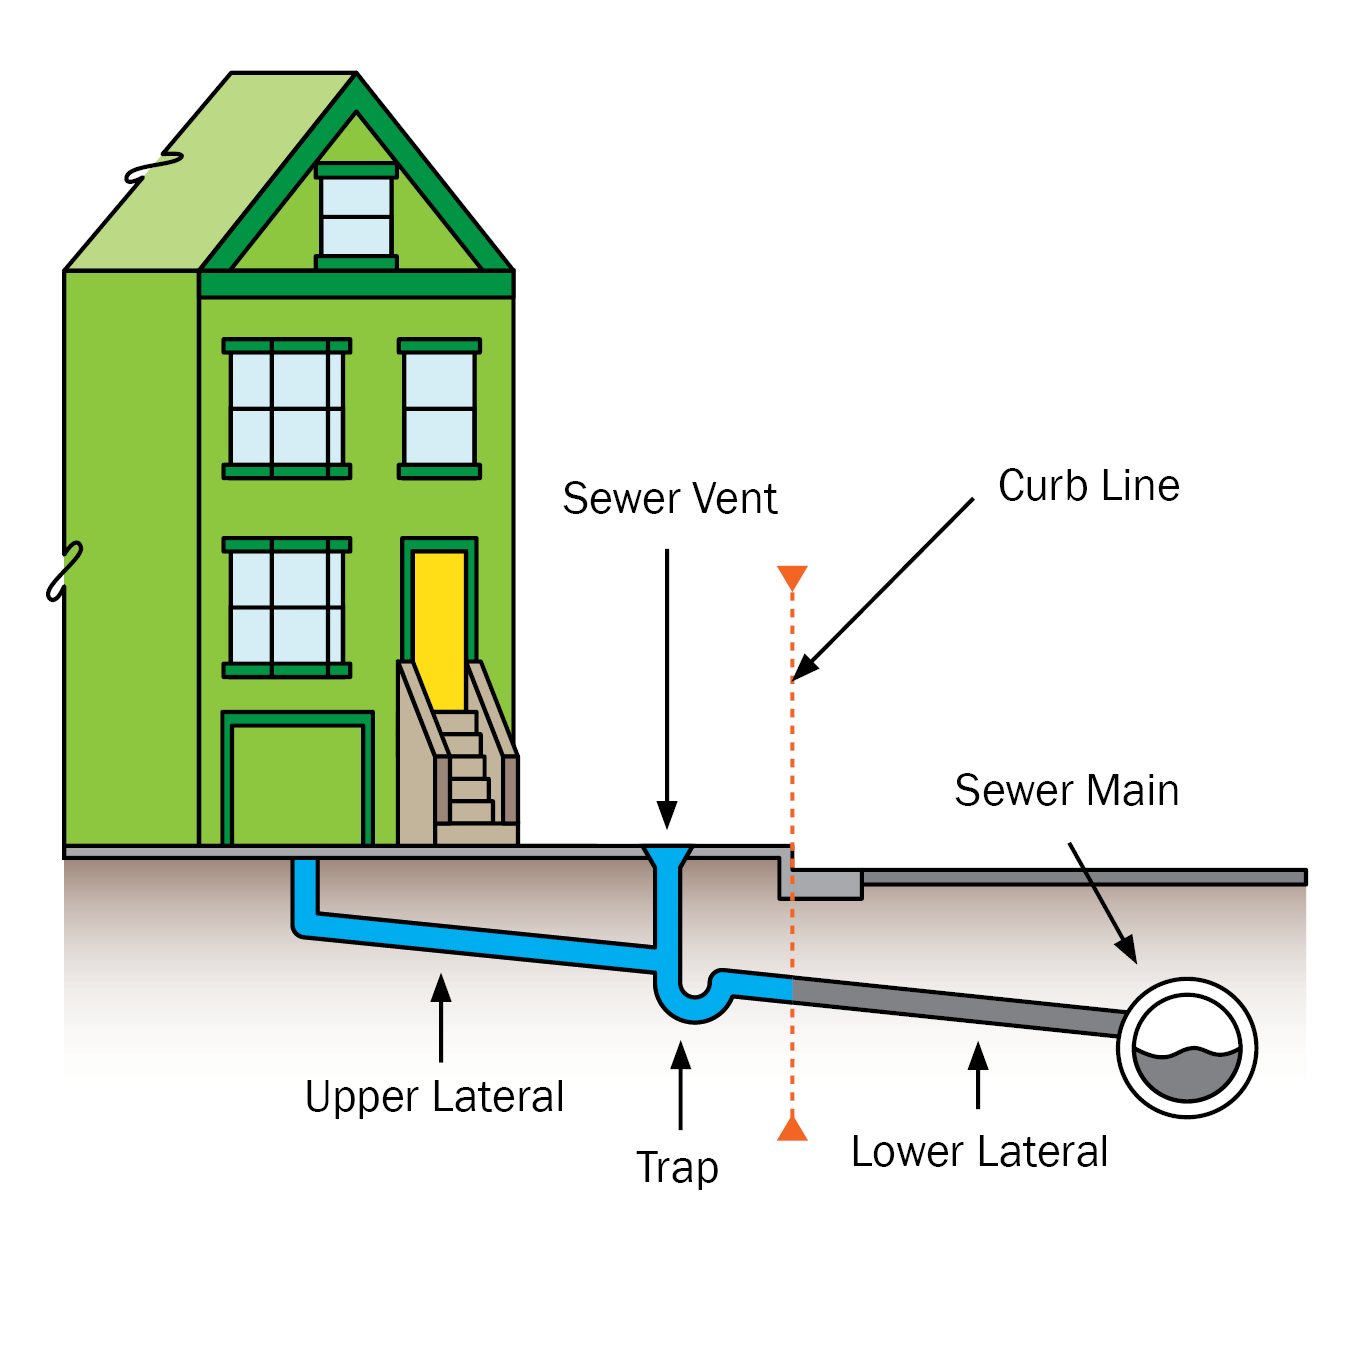 Sewer lateral diagram